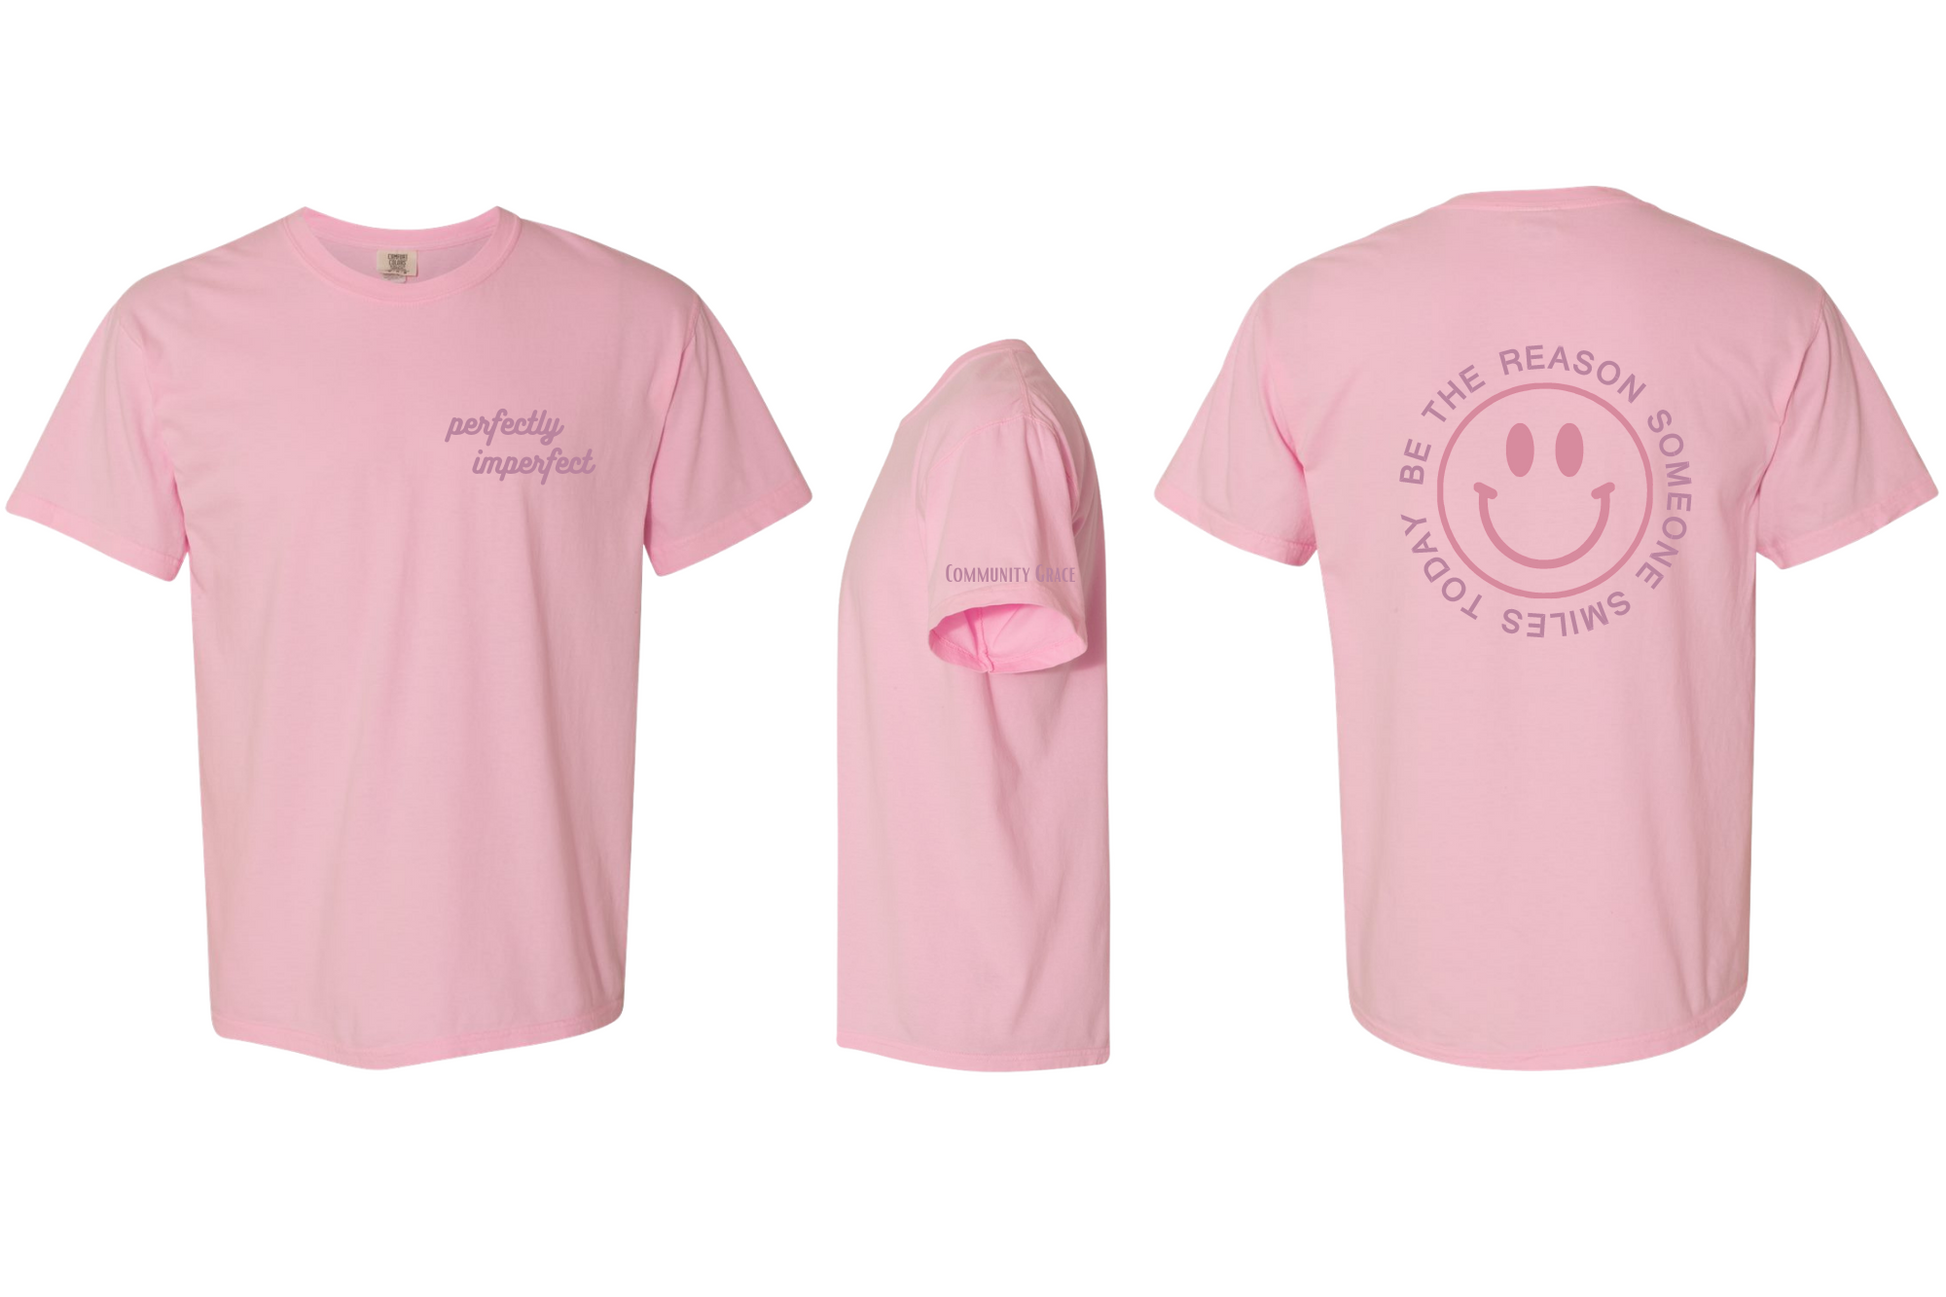 light pink short sleeve shirt with "perfectly imperfect" on the left chest area of the shirt and Community Grace on the sleeve in dark berry tones. On the back of the shirt there is a smiley face in a darker pink color with the words "BE THE REASON SOMEONE SMILES TODAY" around it in capital letters in a darker berry tone.